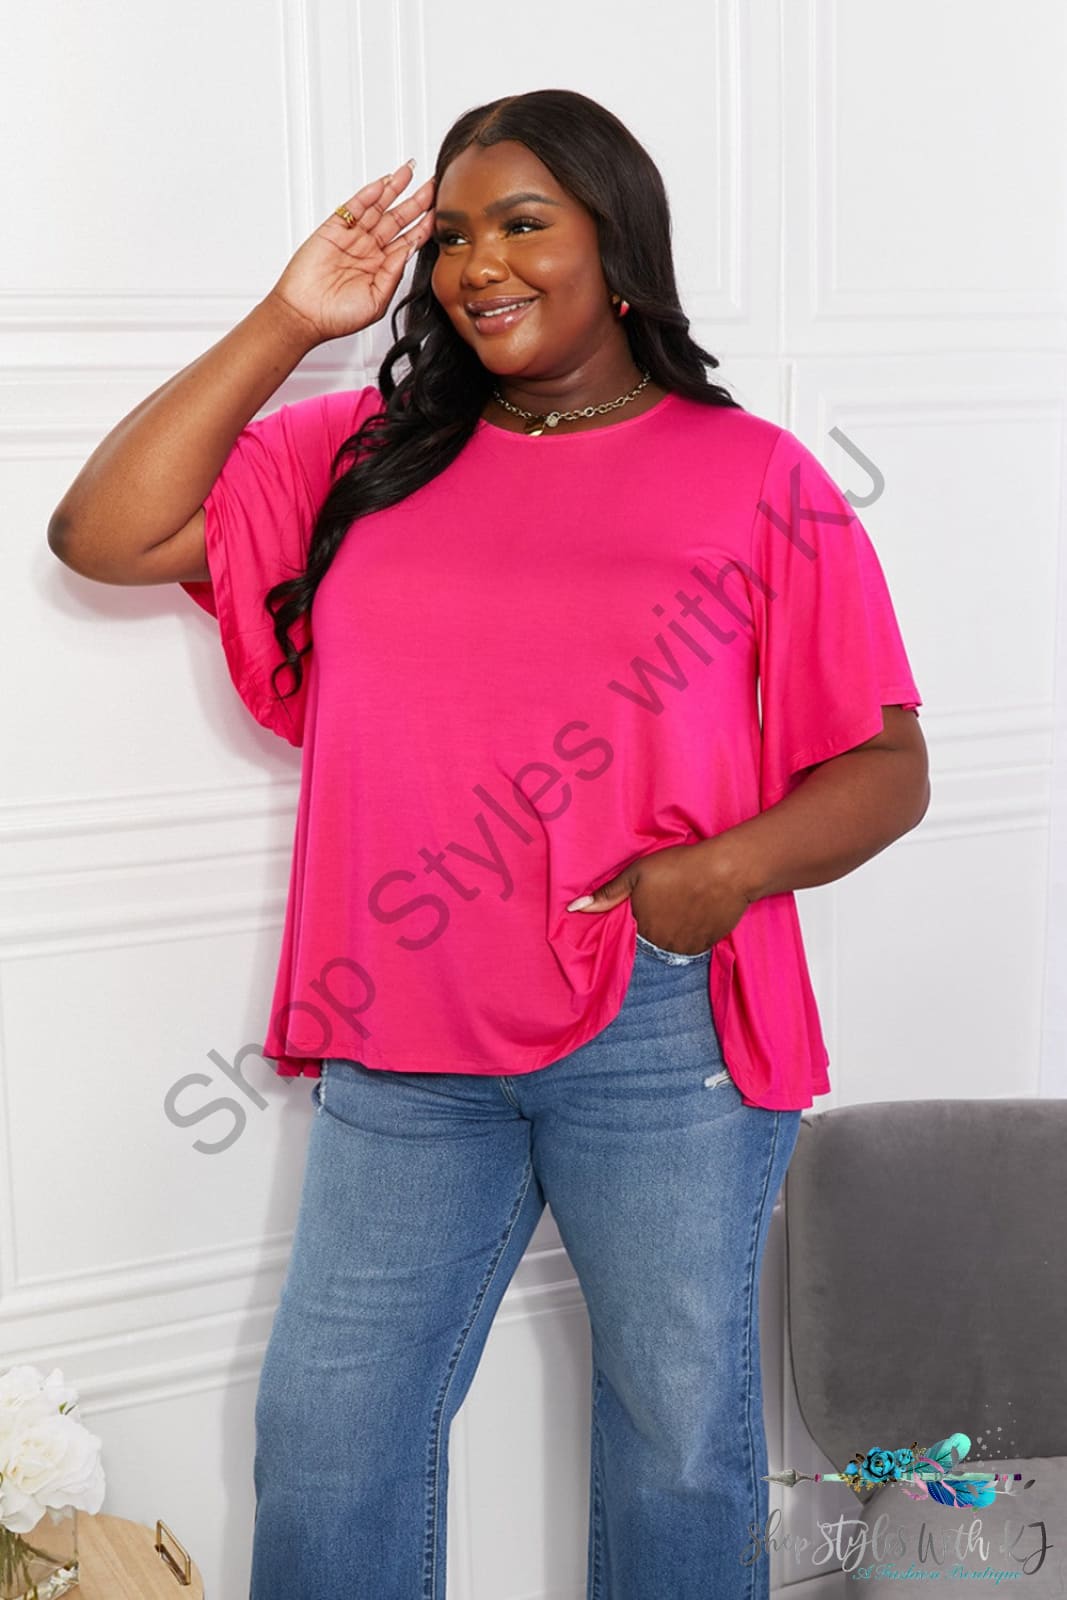 More Than Words Flutter Sleeve Top Shirts & Tops